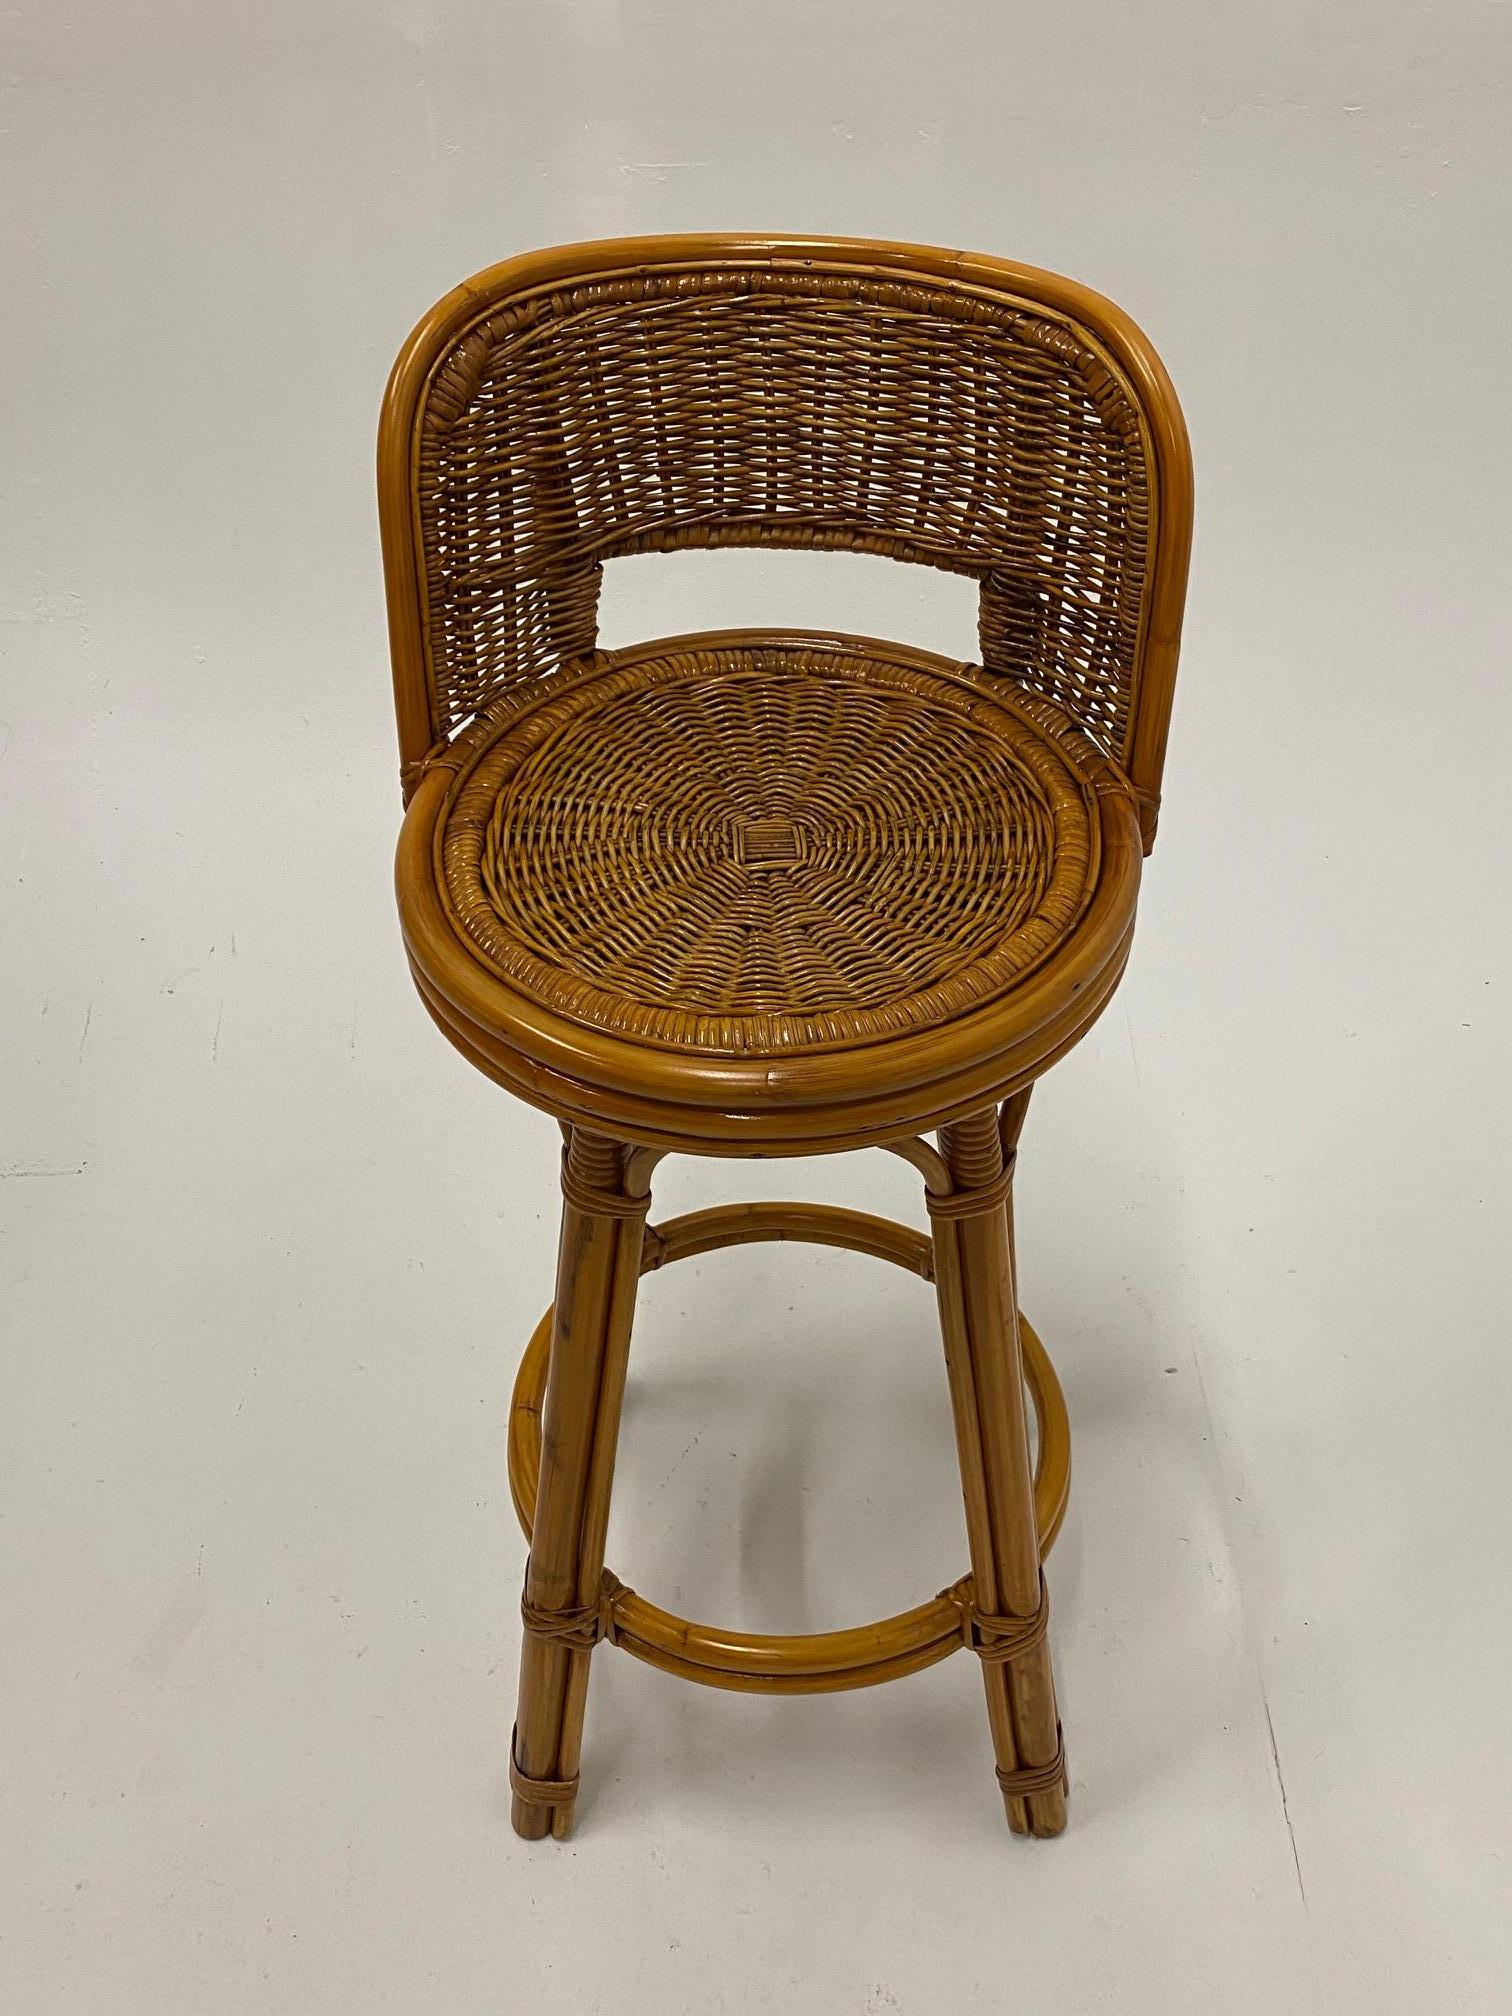 Handsome Pair of Mid-Century Modern Woven Rattan Barstools In Good Condition For Sale In Hopewell, NJ